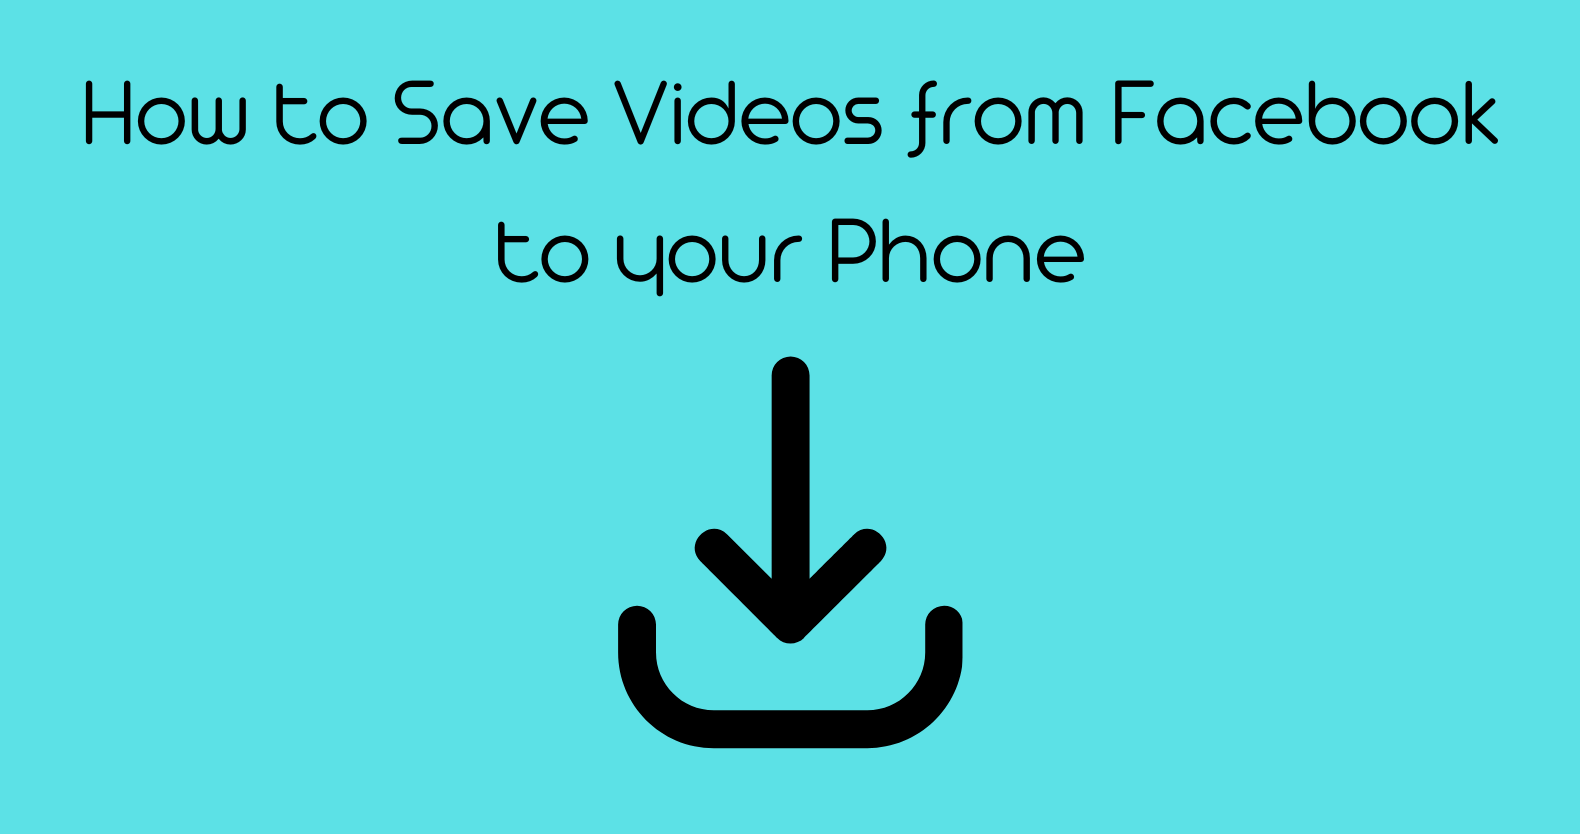 How to Save Videos from Facebook to your Phone